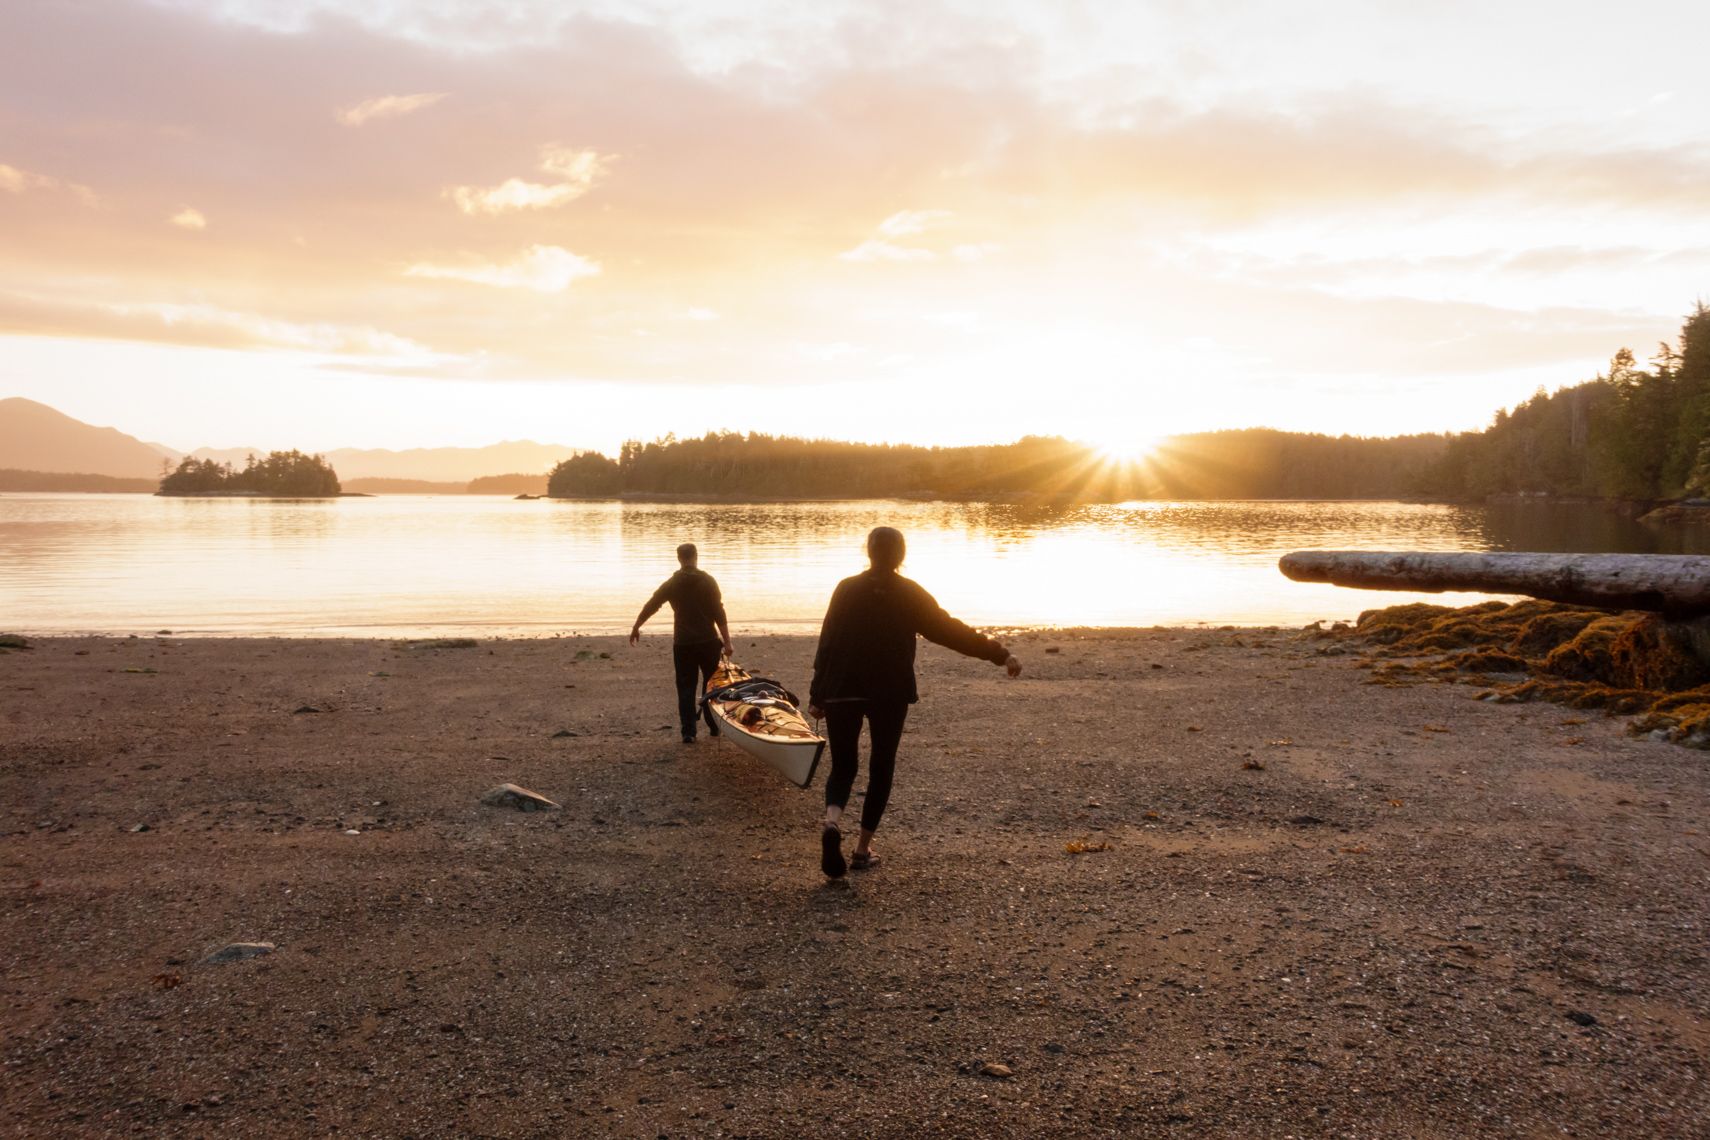 People couple carrying launching a sea kayak at sunrise in the remote wilderness, Broken Group Islands, Barkley Sound, Pacific Rim National Park, British Columbia, Canada. Adventure travel teamwork beginnings relationships concept.